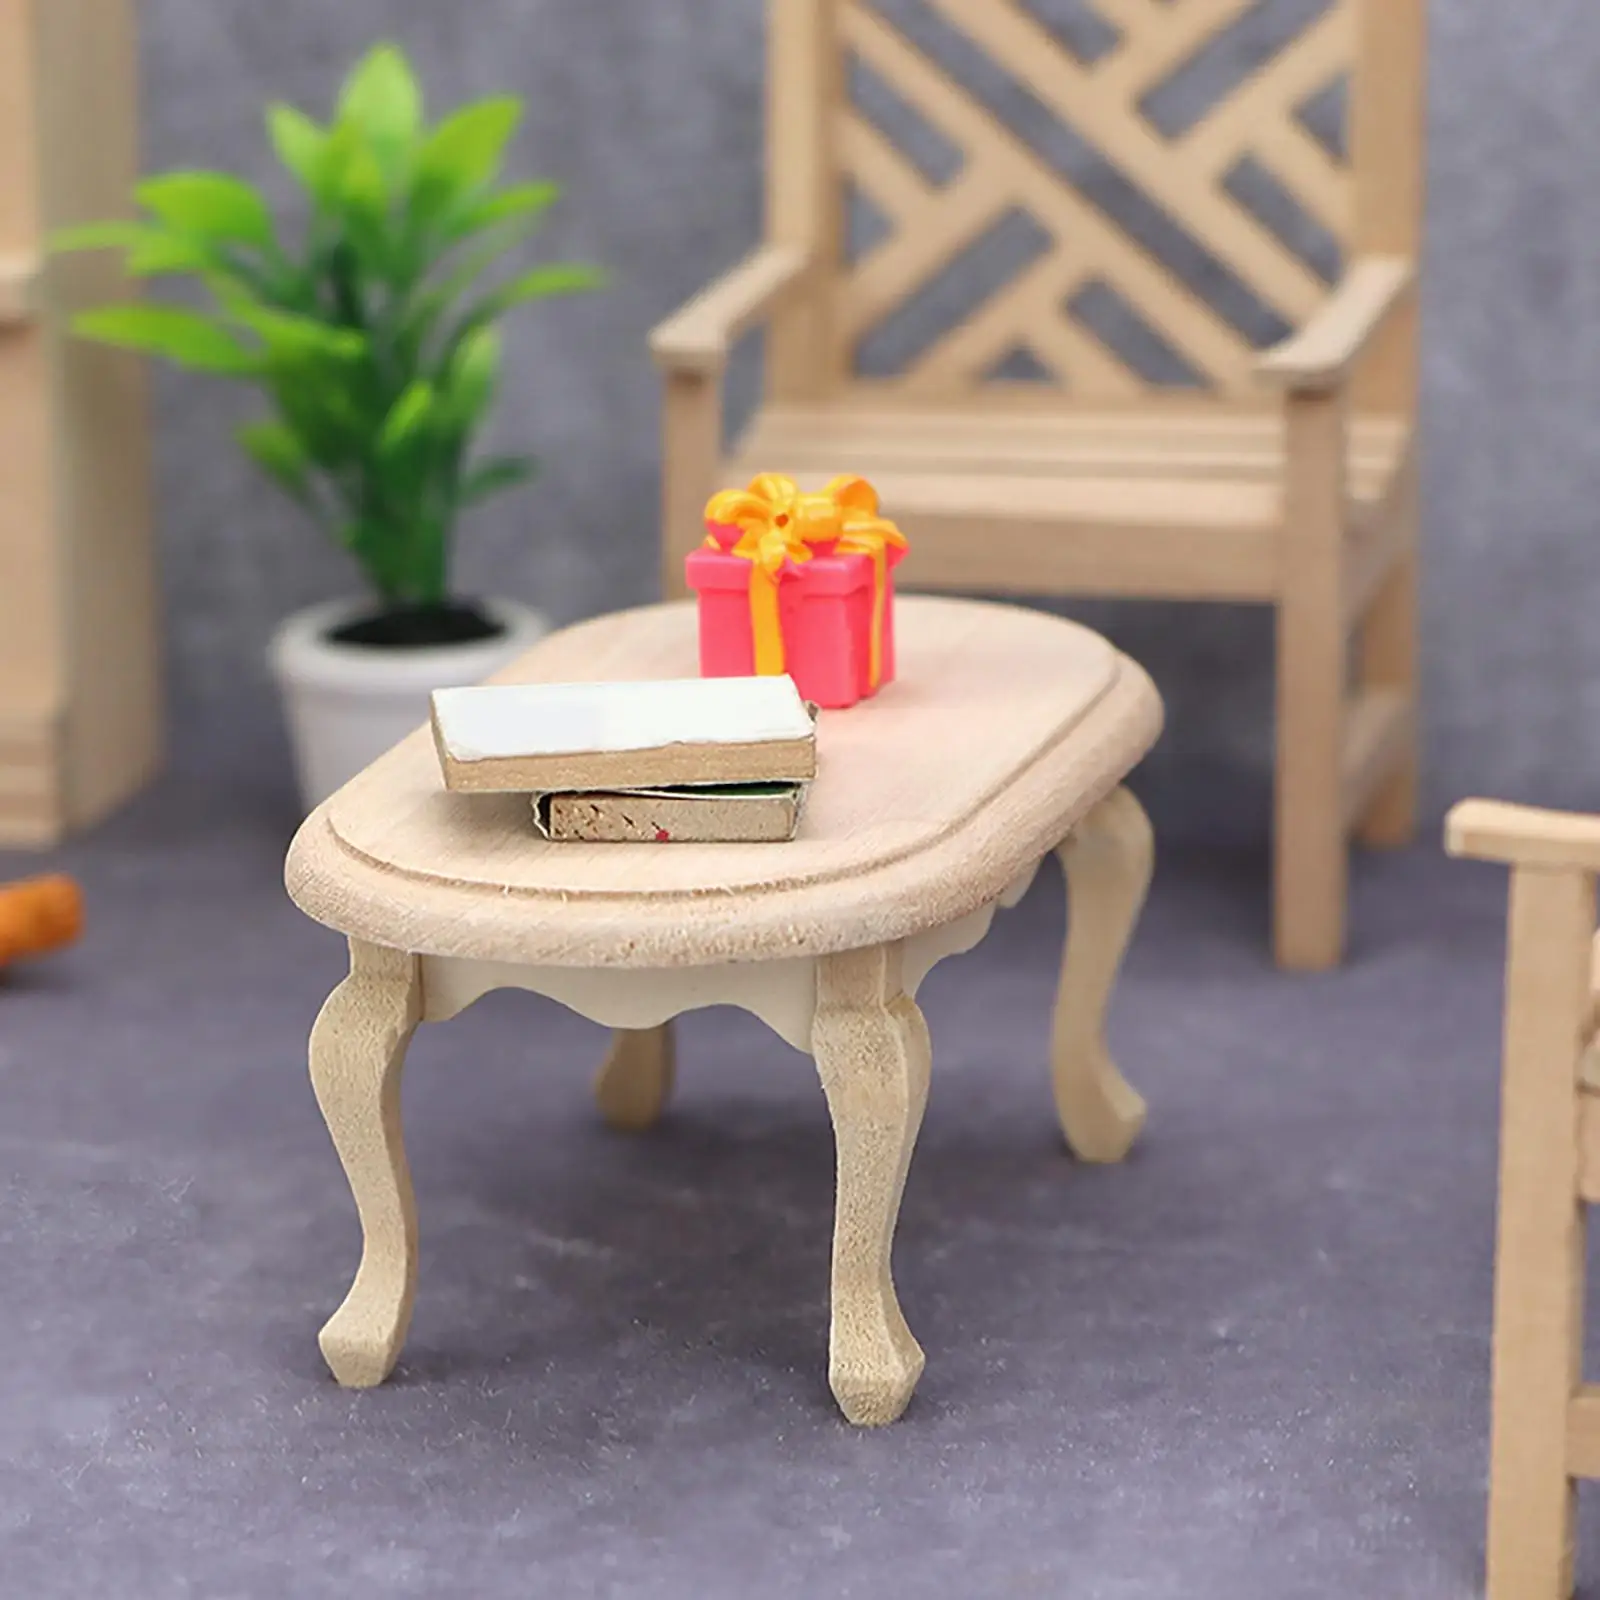 Dollhouse Miniature Table Model Toys 1/12 Scale Accessory for Ornaments